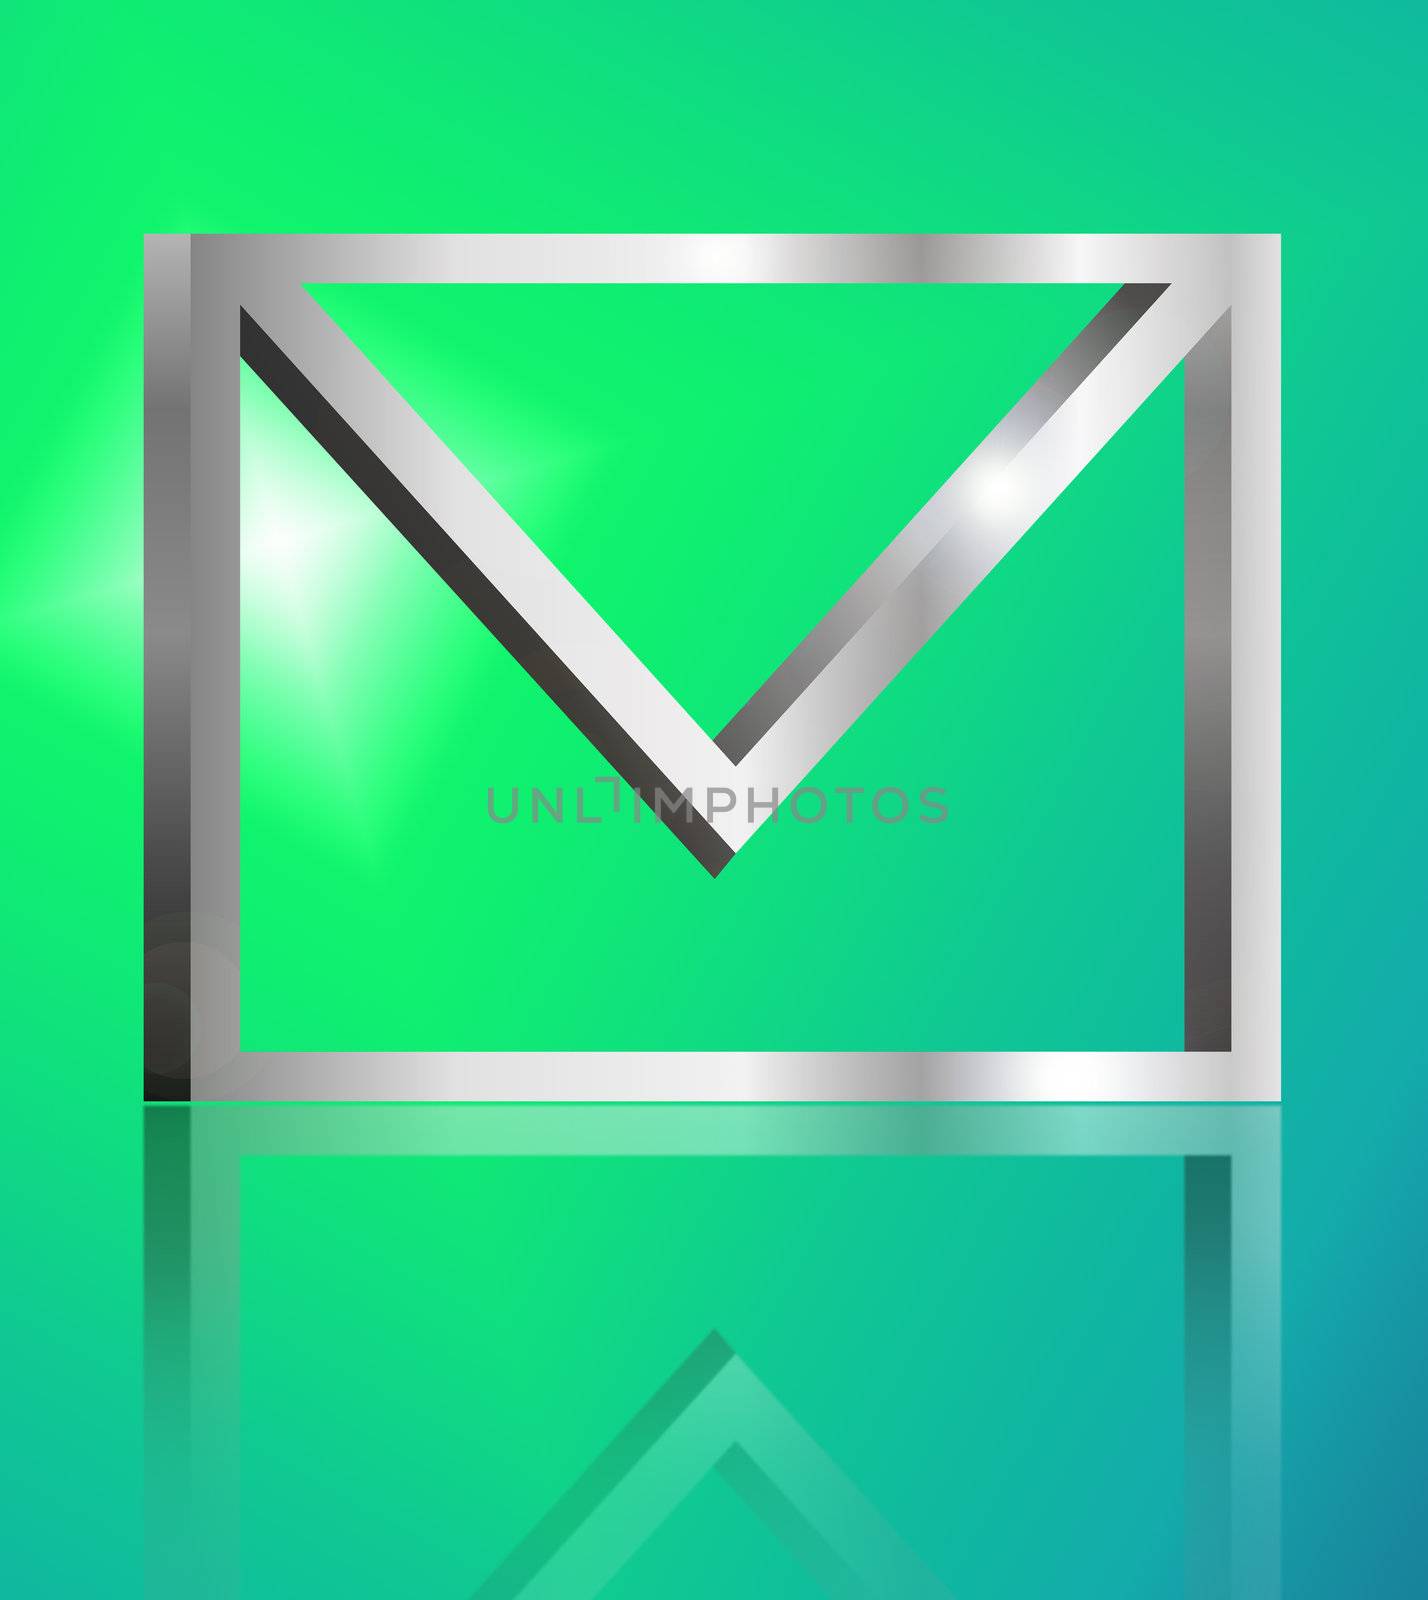 Illustration depicting a single metallic email symbol arranged over green light effect and reflecting into foreground.